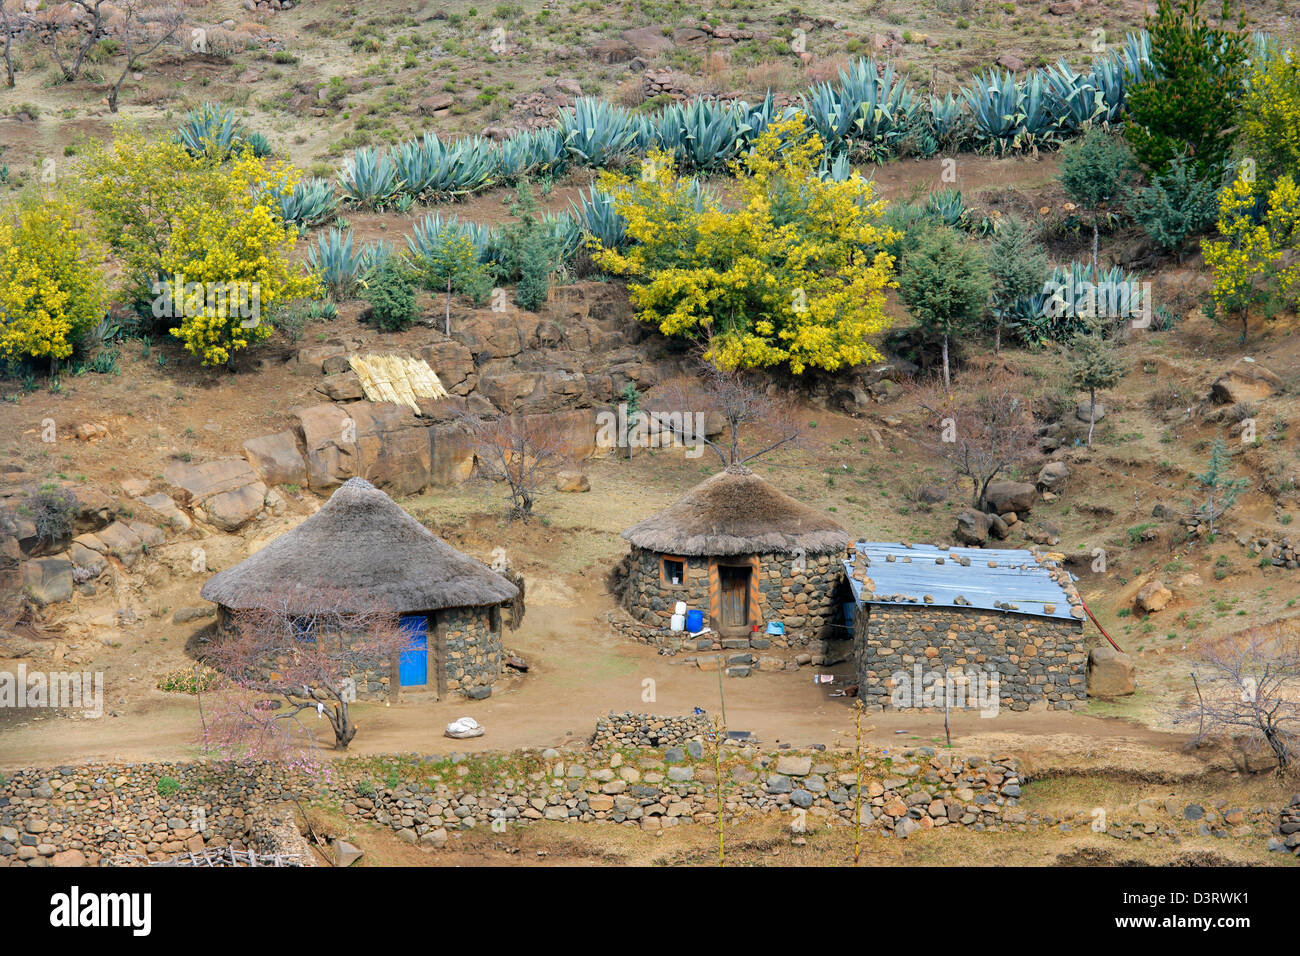 Small huts typical of rural settlements in the Kingdom of Lesotho, southern Africa Stock Photo